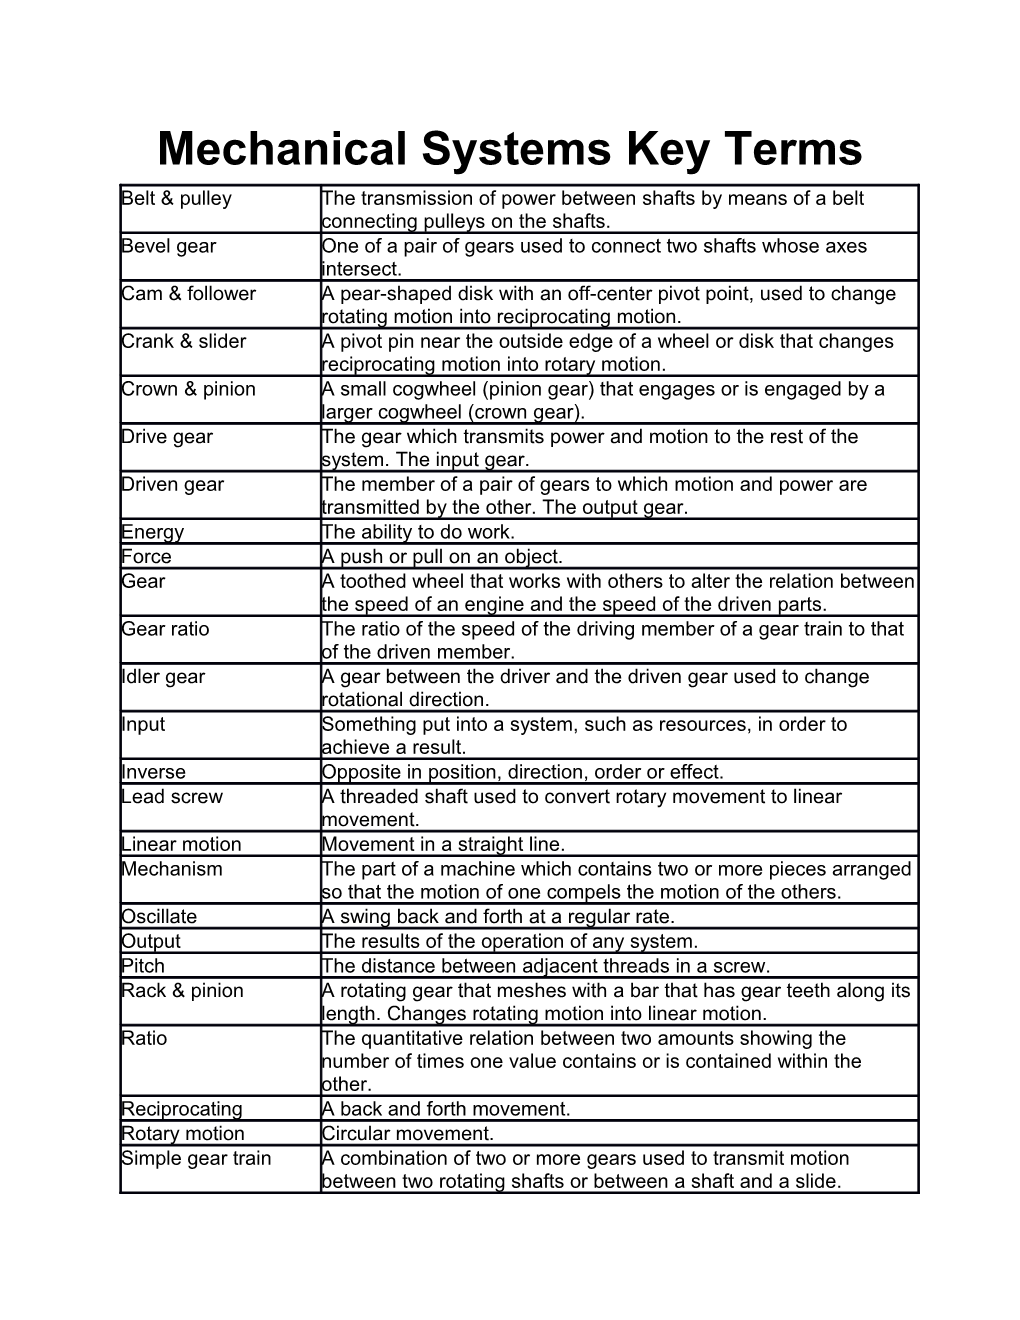 Mechanical Systems Key Terms